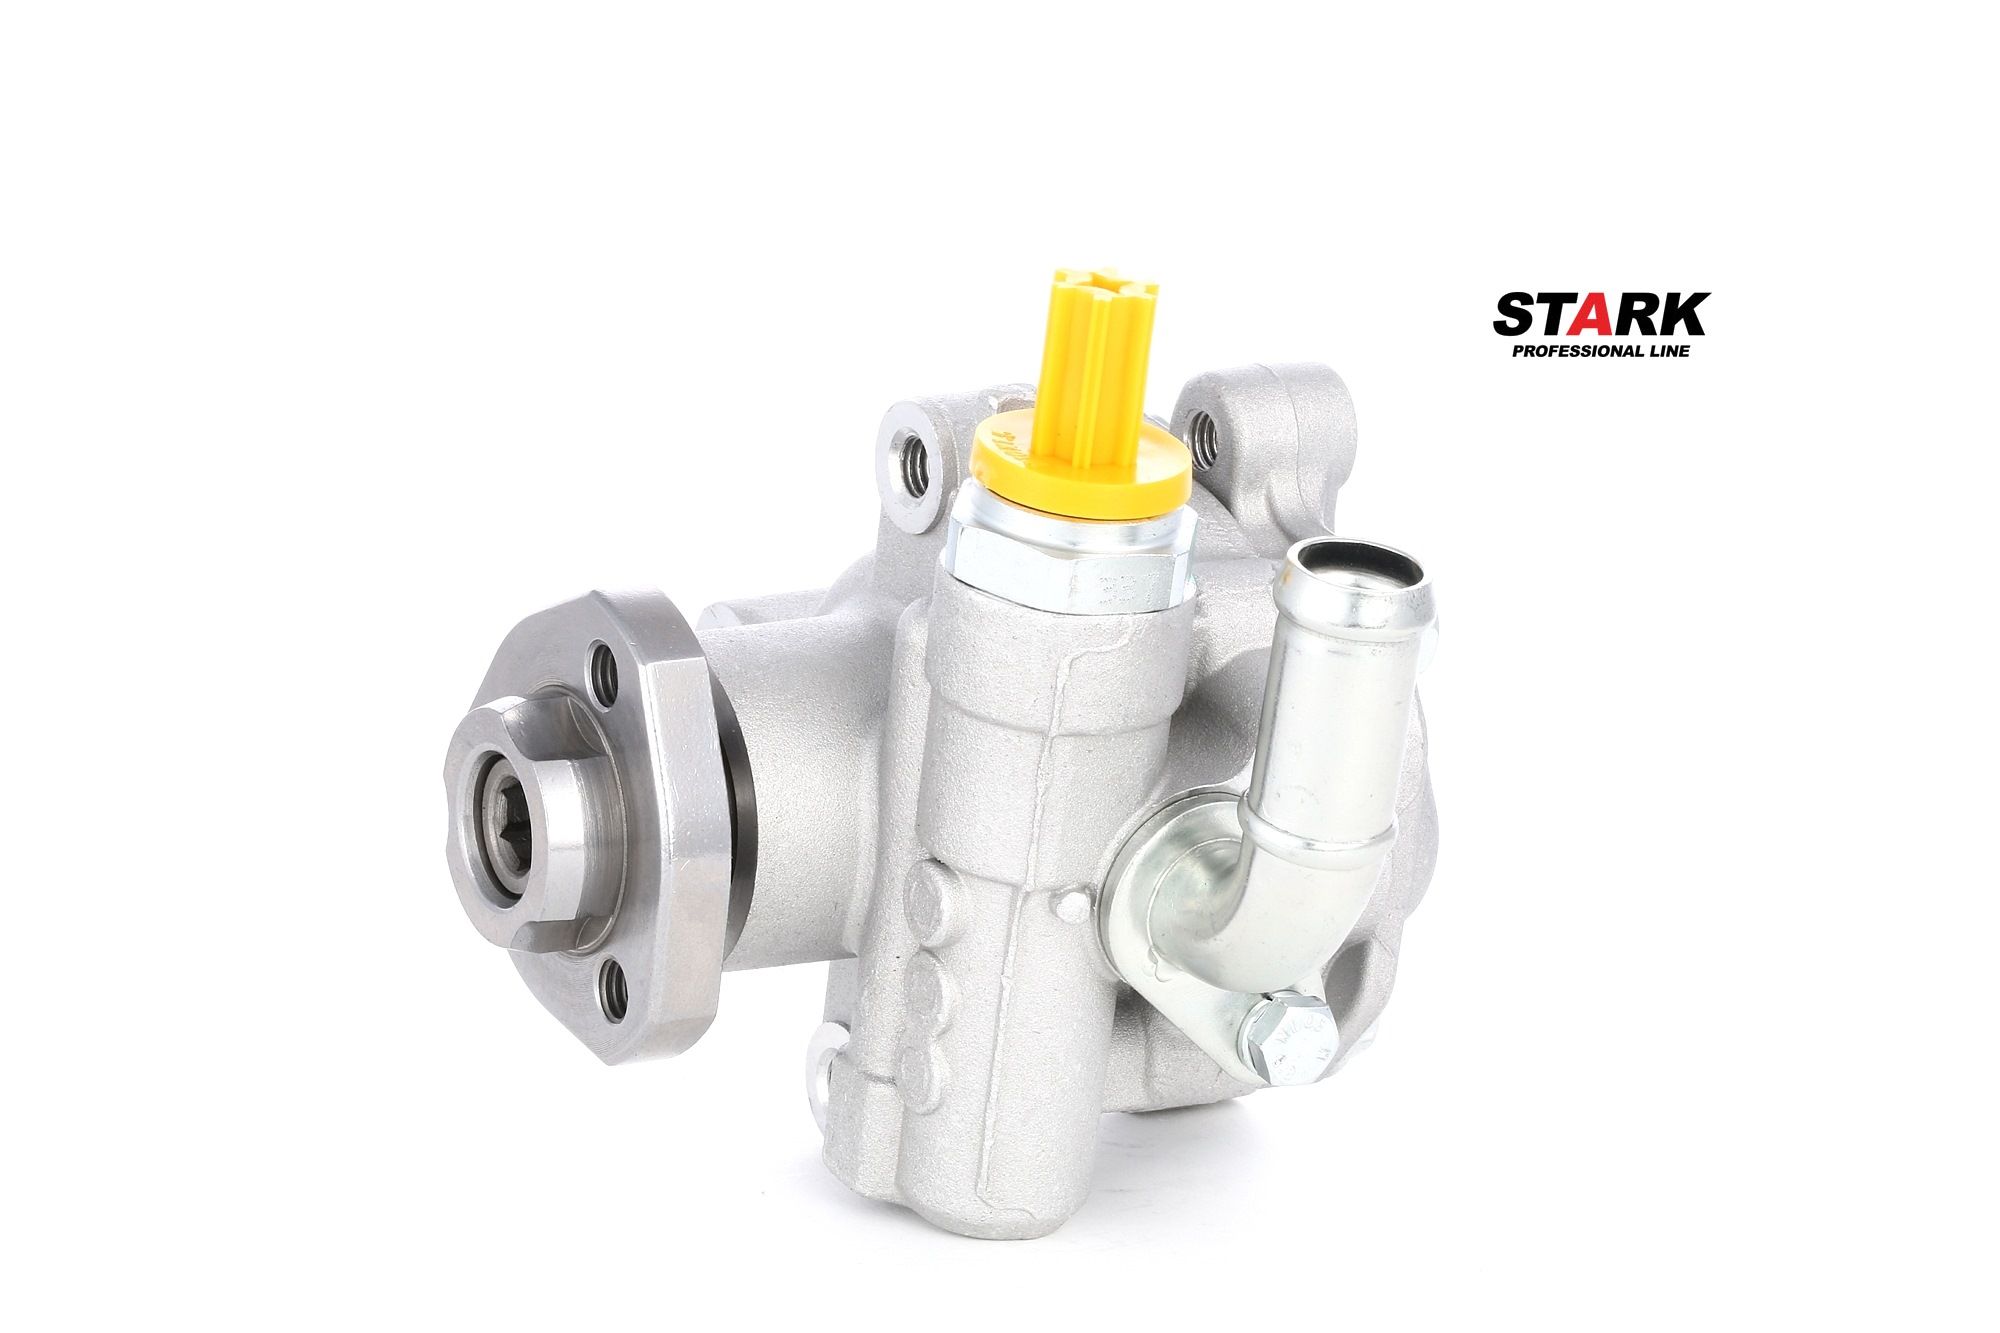 STARK Hydraulic, 120 bar, 90 l/h, Clockwise rotation, for left-hand/right-hand drive vehicles Pressure [bar]: 120bar, Left-/right-hand drive vehicles: for left-hand/right-hand drive vehicles Steering Pump SKHP-0540055 buy